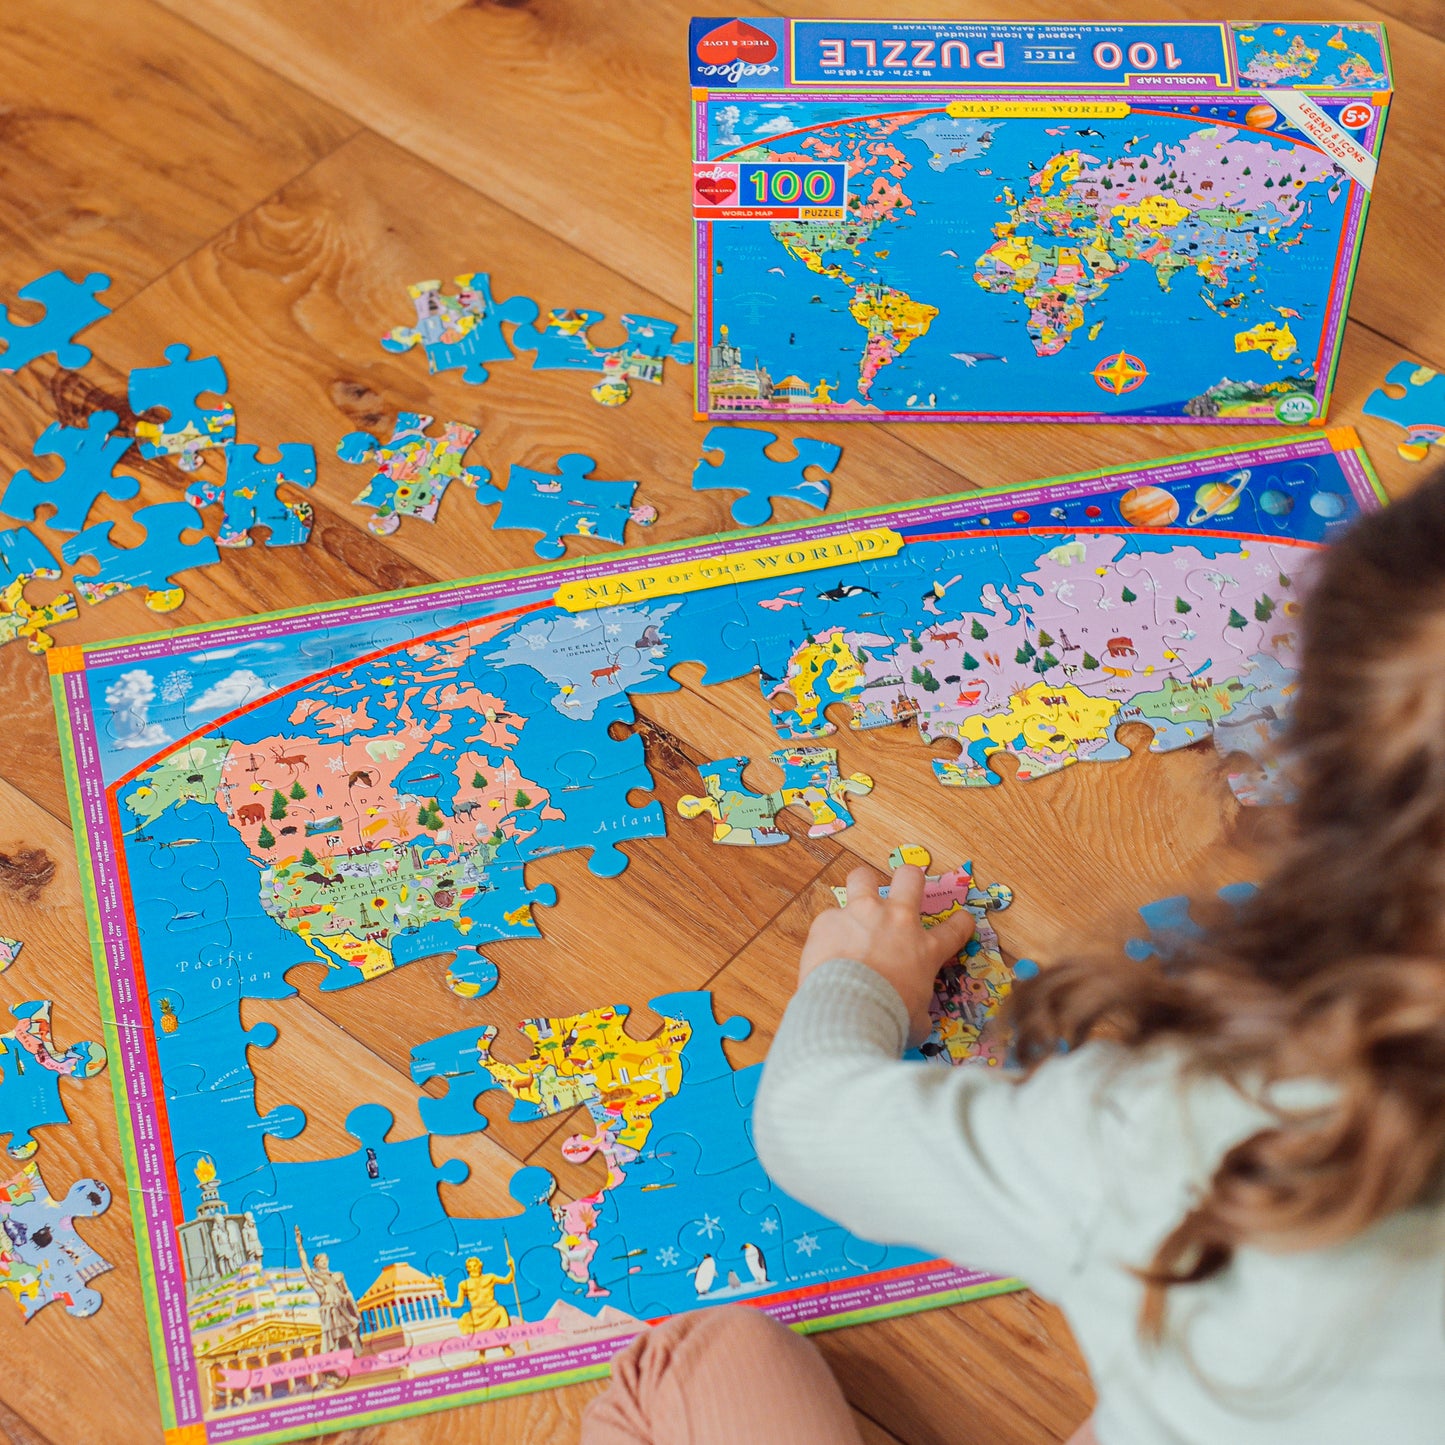 World Map Educational 100 Piece Puzzle by eeBoo Gifts for Kids Ages 5+